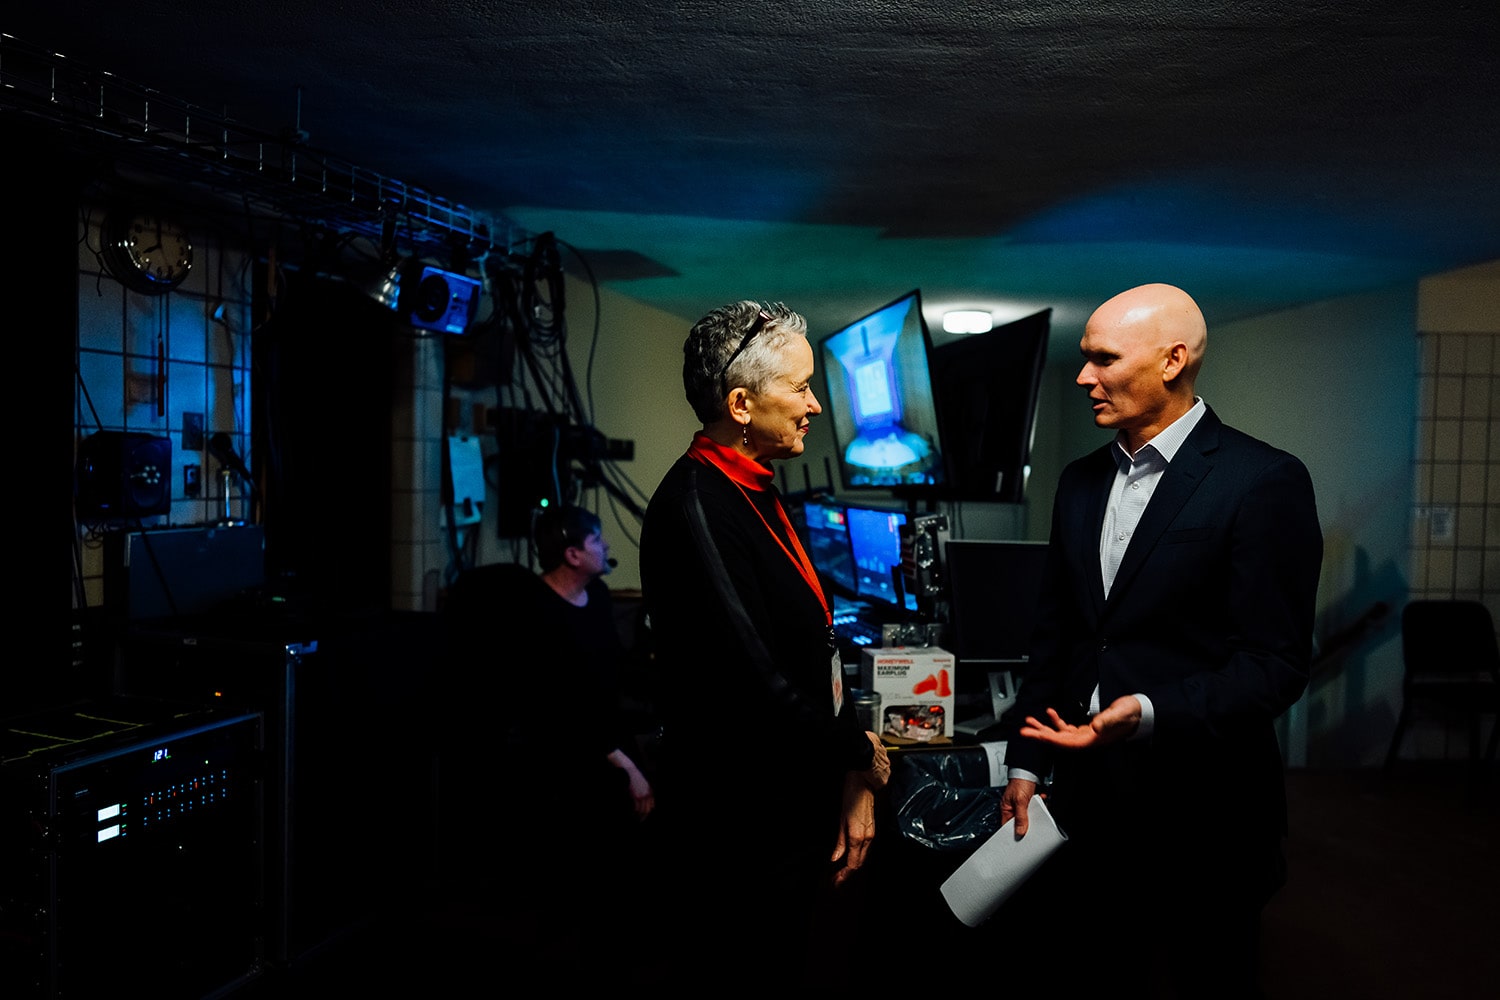 Laurie Dean Torrell & Anthony Doerr backstage at BABEL 033023 photo by Pat Cray